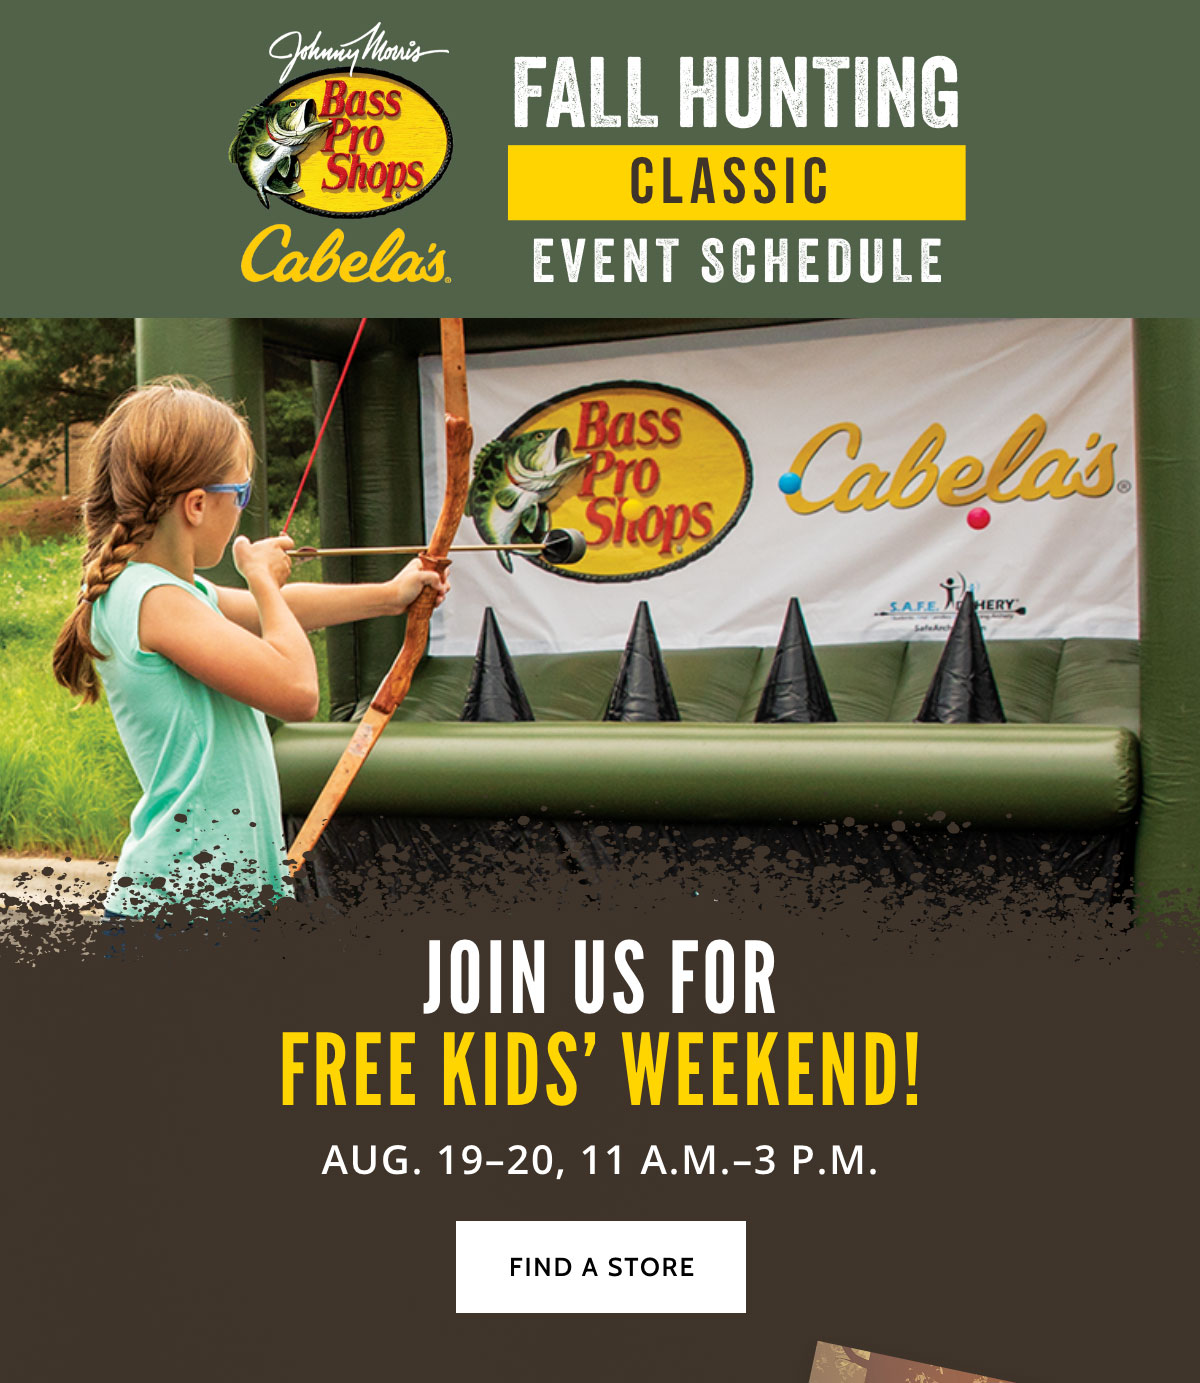 Trade In Old Gear At Your Local Cabela's & Save! - Cabela's